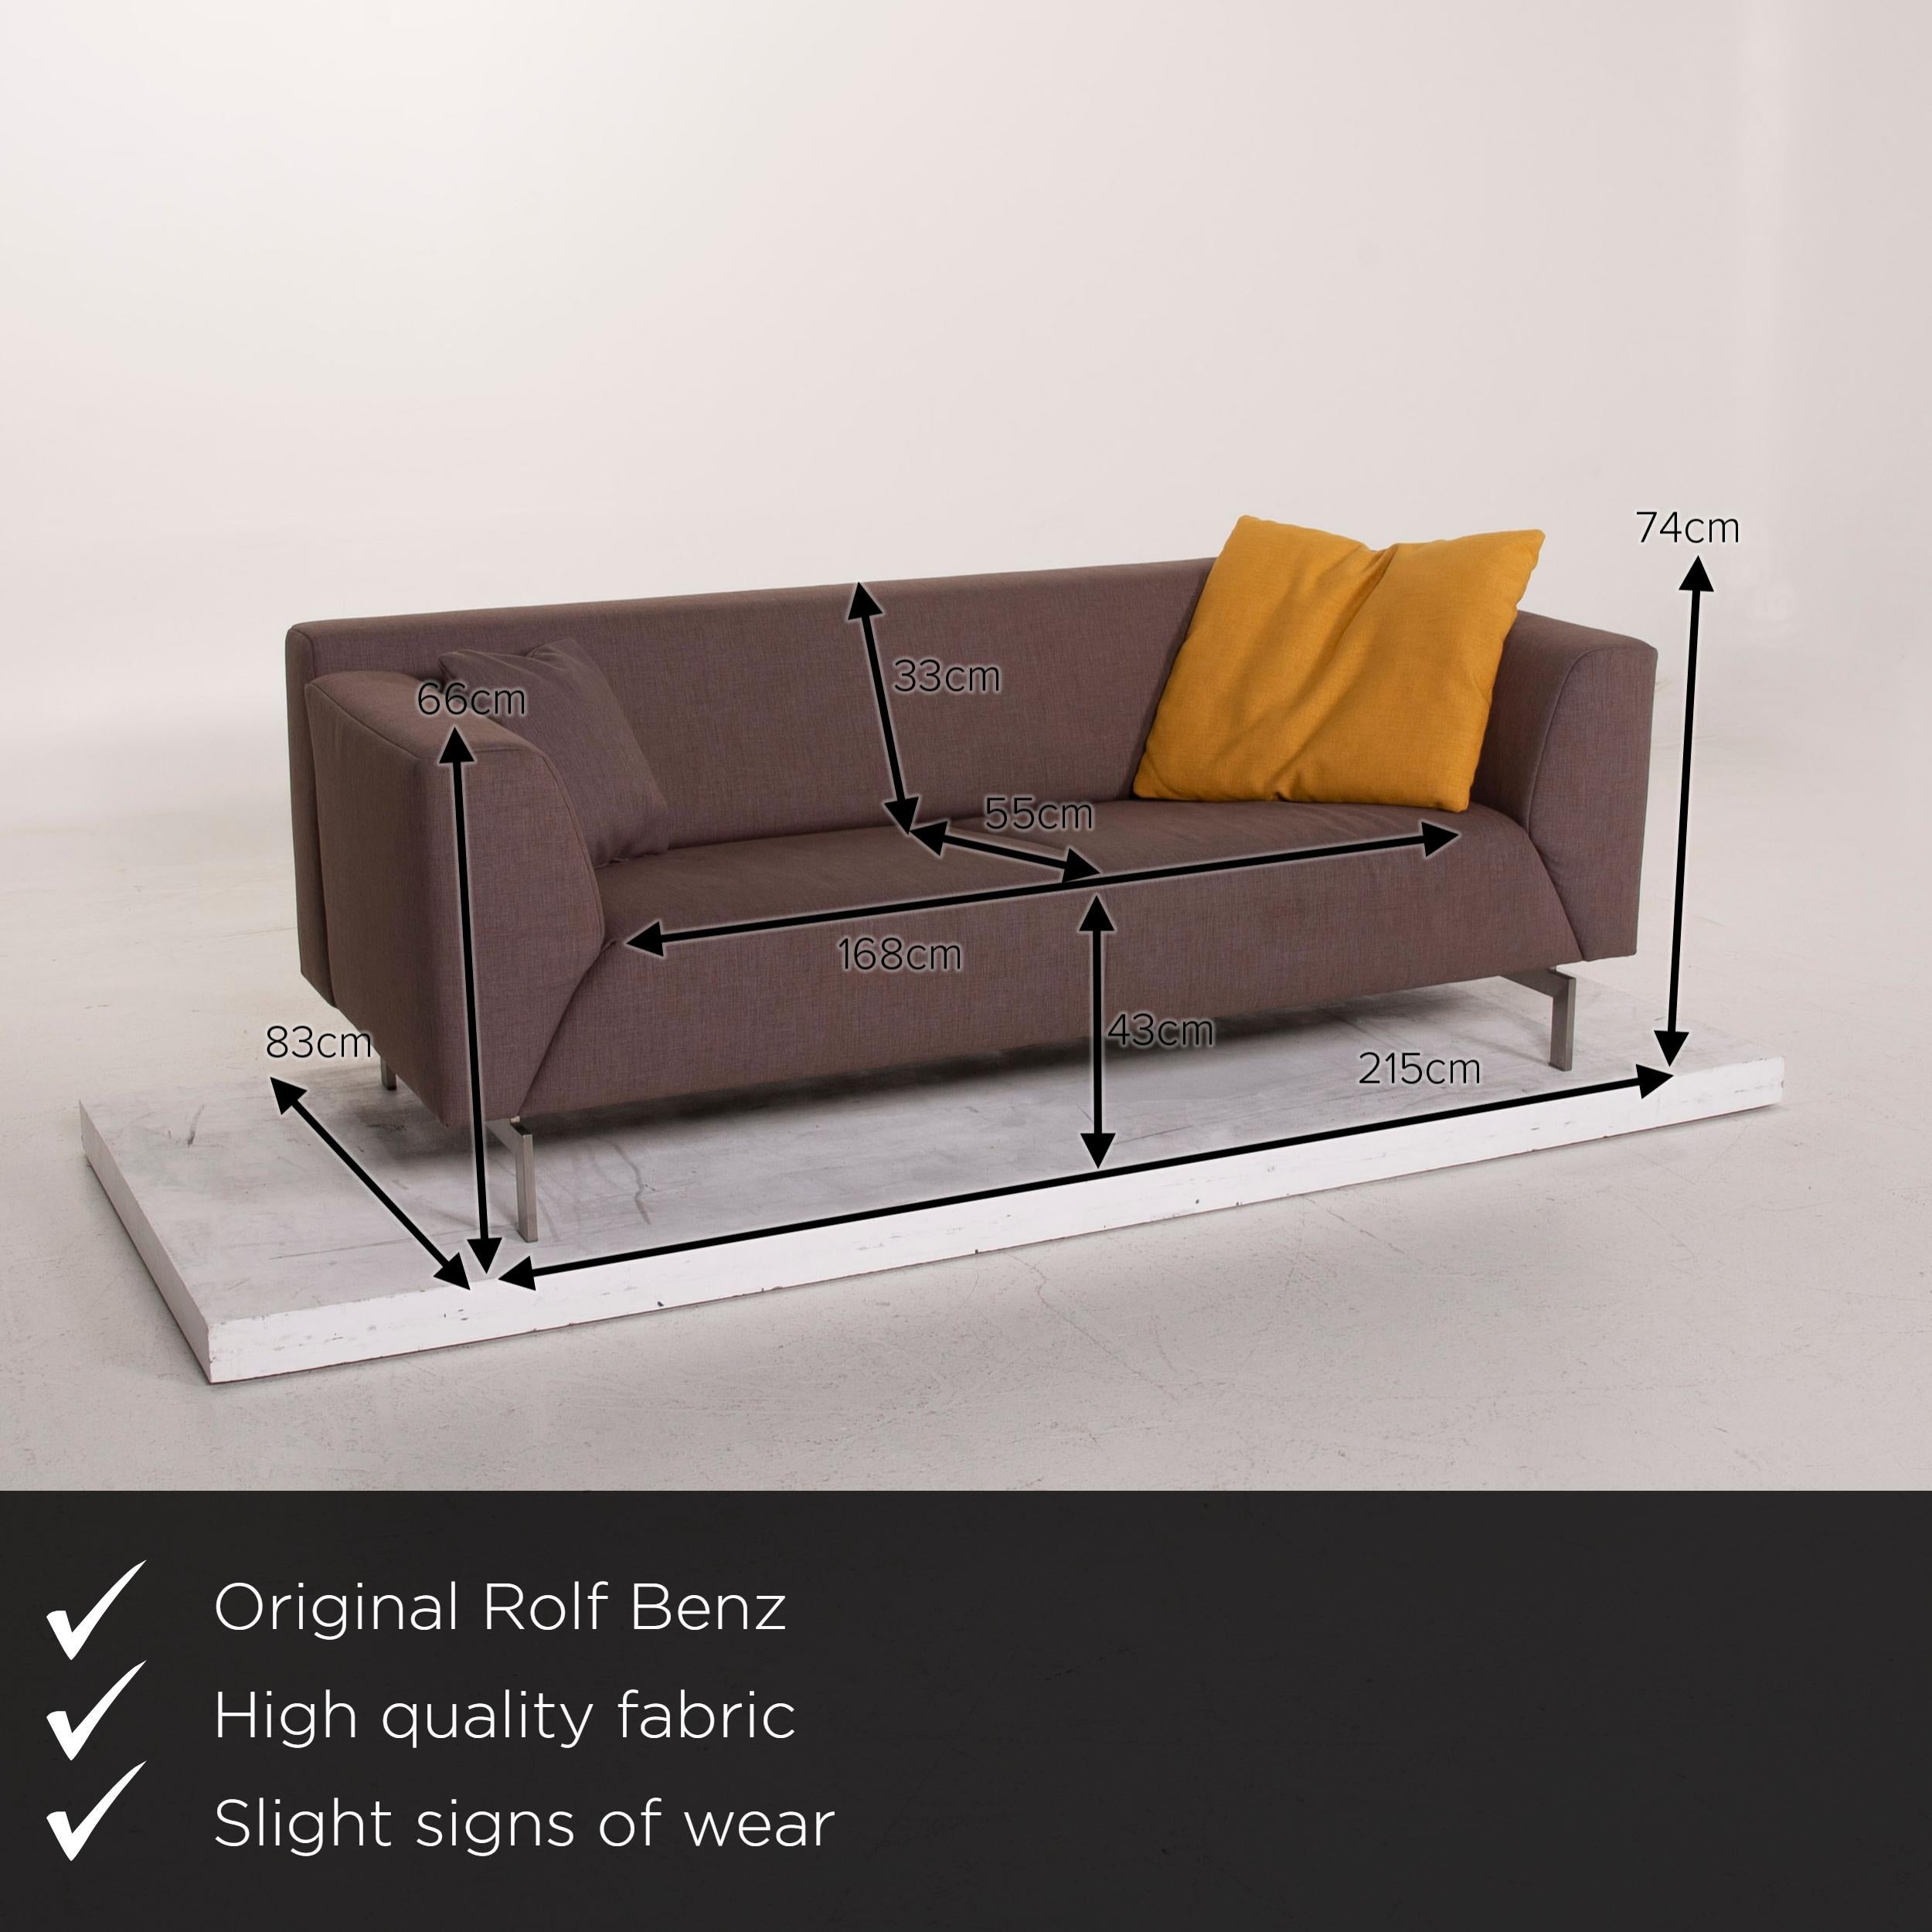 We present to you a Rolf Benz 318 Linea fabric sofa set gray 2x two-seat.
 

 Product measurements in centimeters:
 

Depth 83
Width 215
Height 74
Seat height 43
Rest height 86
Seat depth 55
Seat width 168
Back height 33.
 